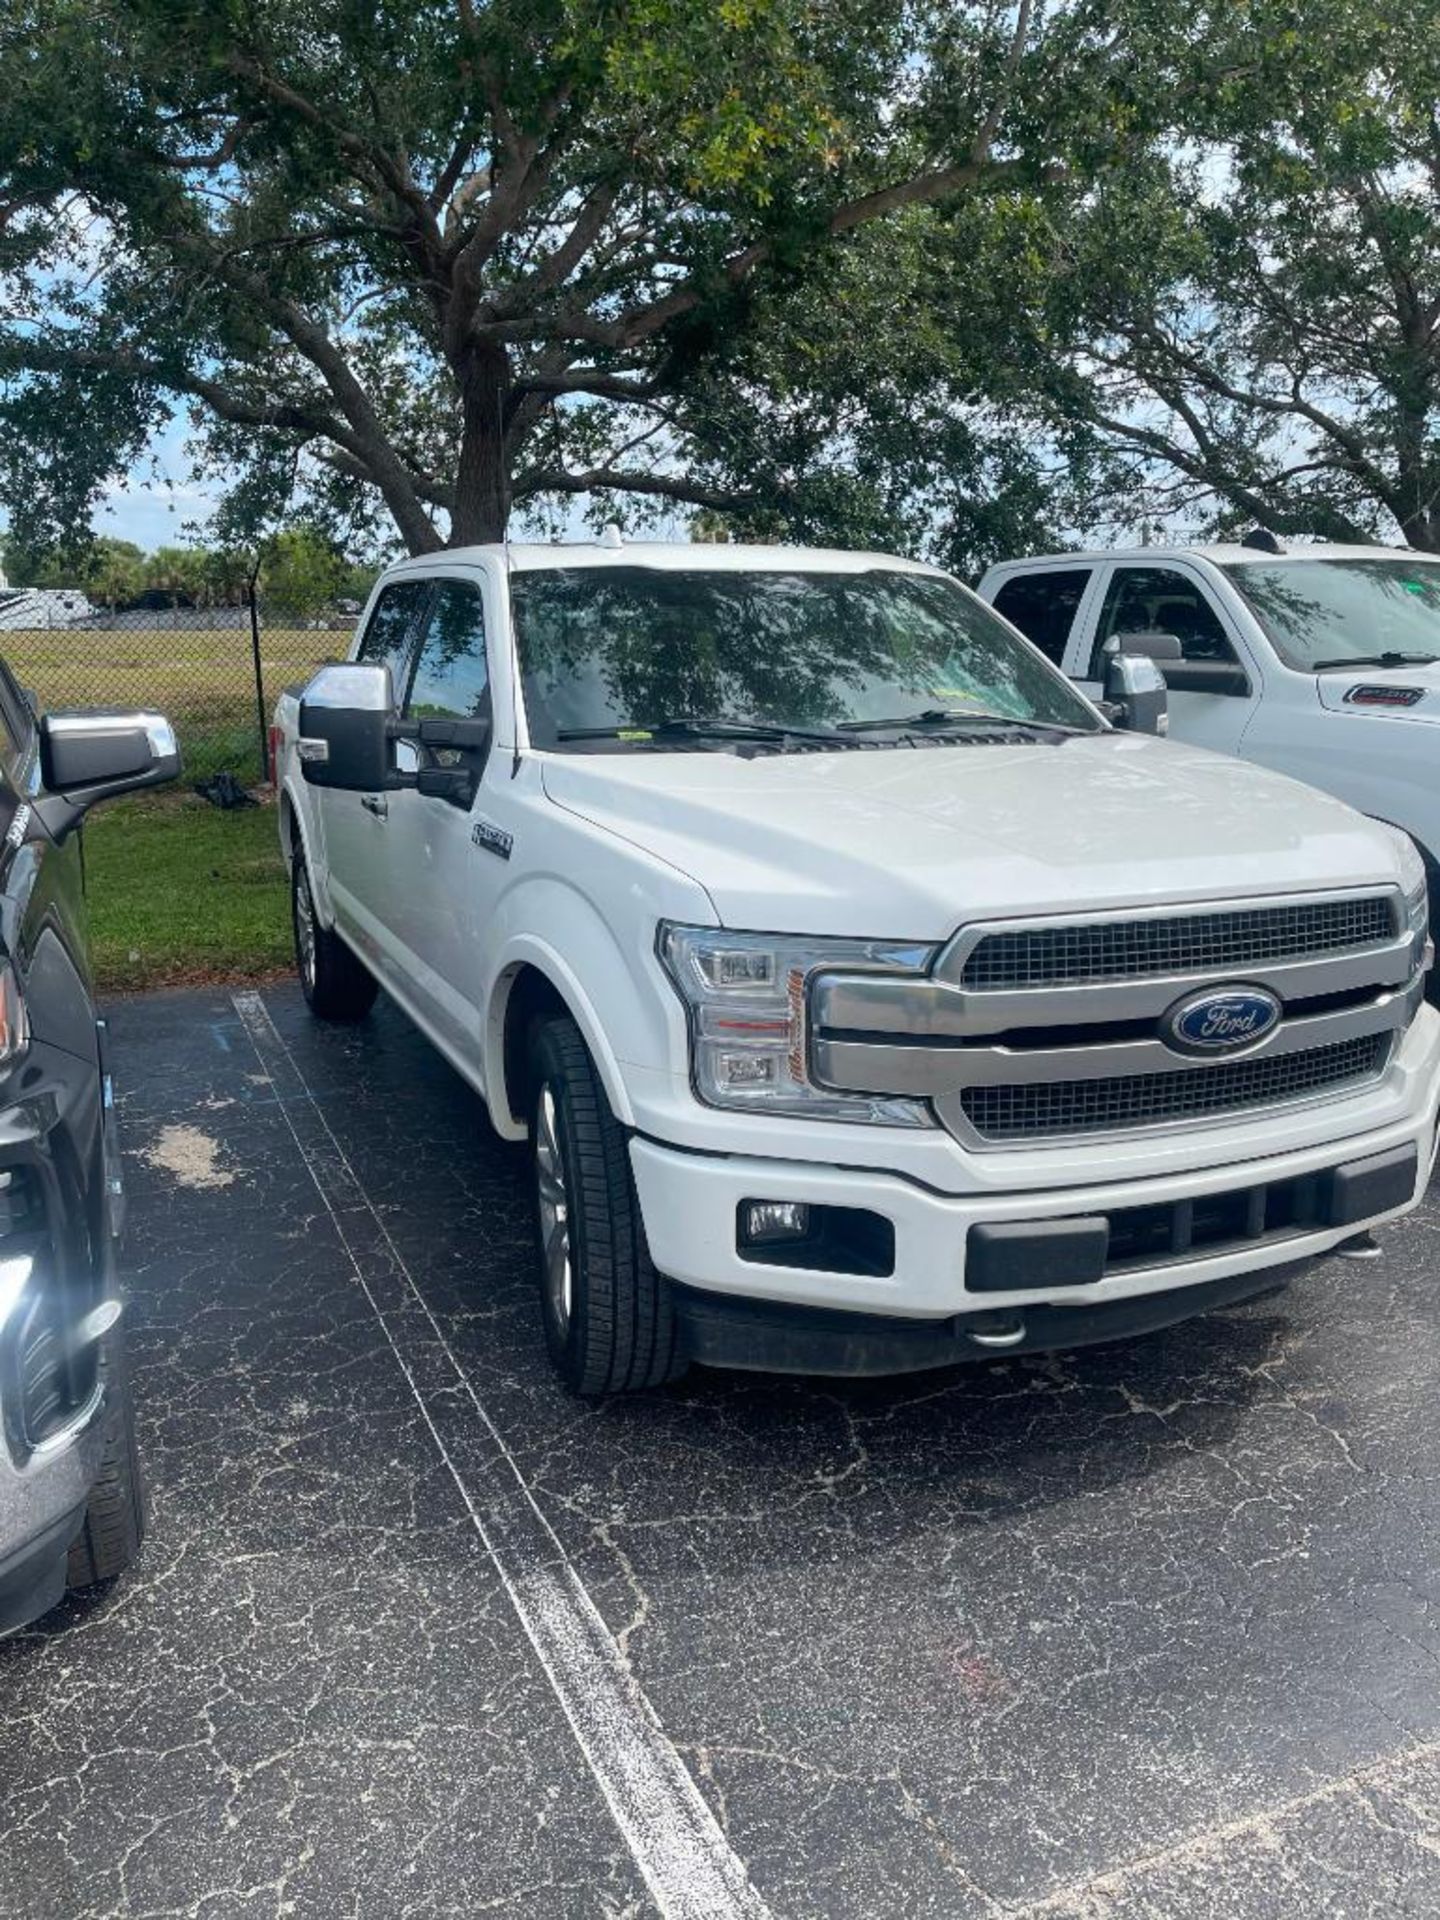 2020 Ford F-150 Plat 4WD Super Crew V6 Turbo, Gas, License# PCY-Y16, VIN 1FTEW1E42LFB28361, 77,200 M - Image 2 of 15